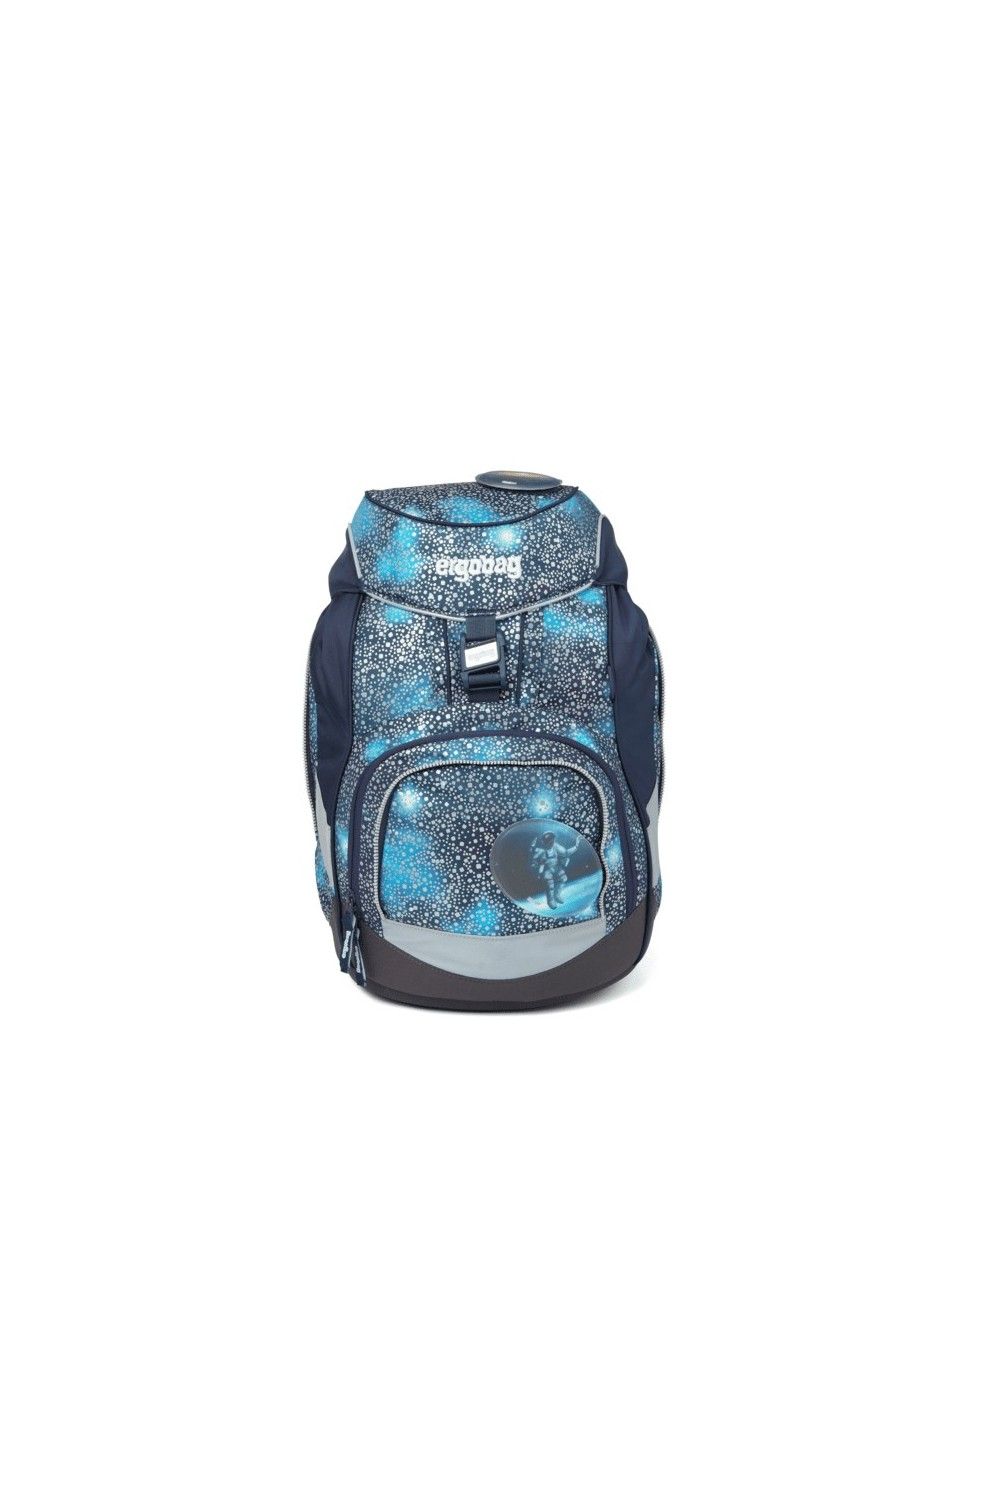 ergobag pack school backpack set 6 pieces Limited Edition Bär Anhalter durch Galaxis